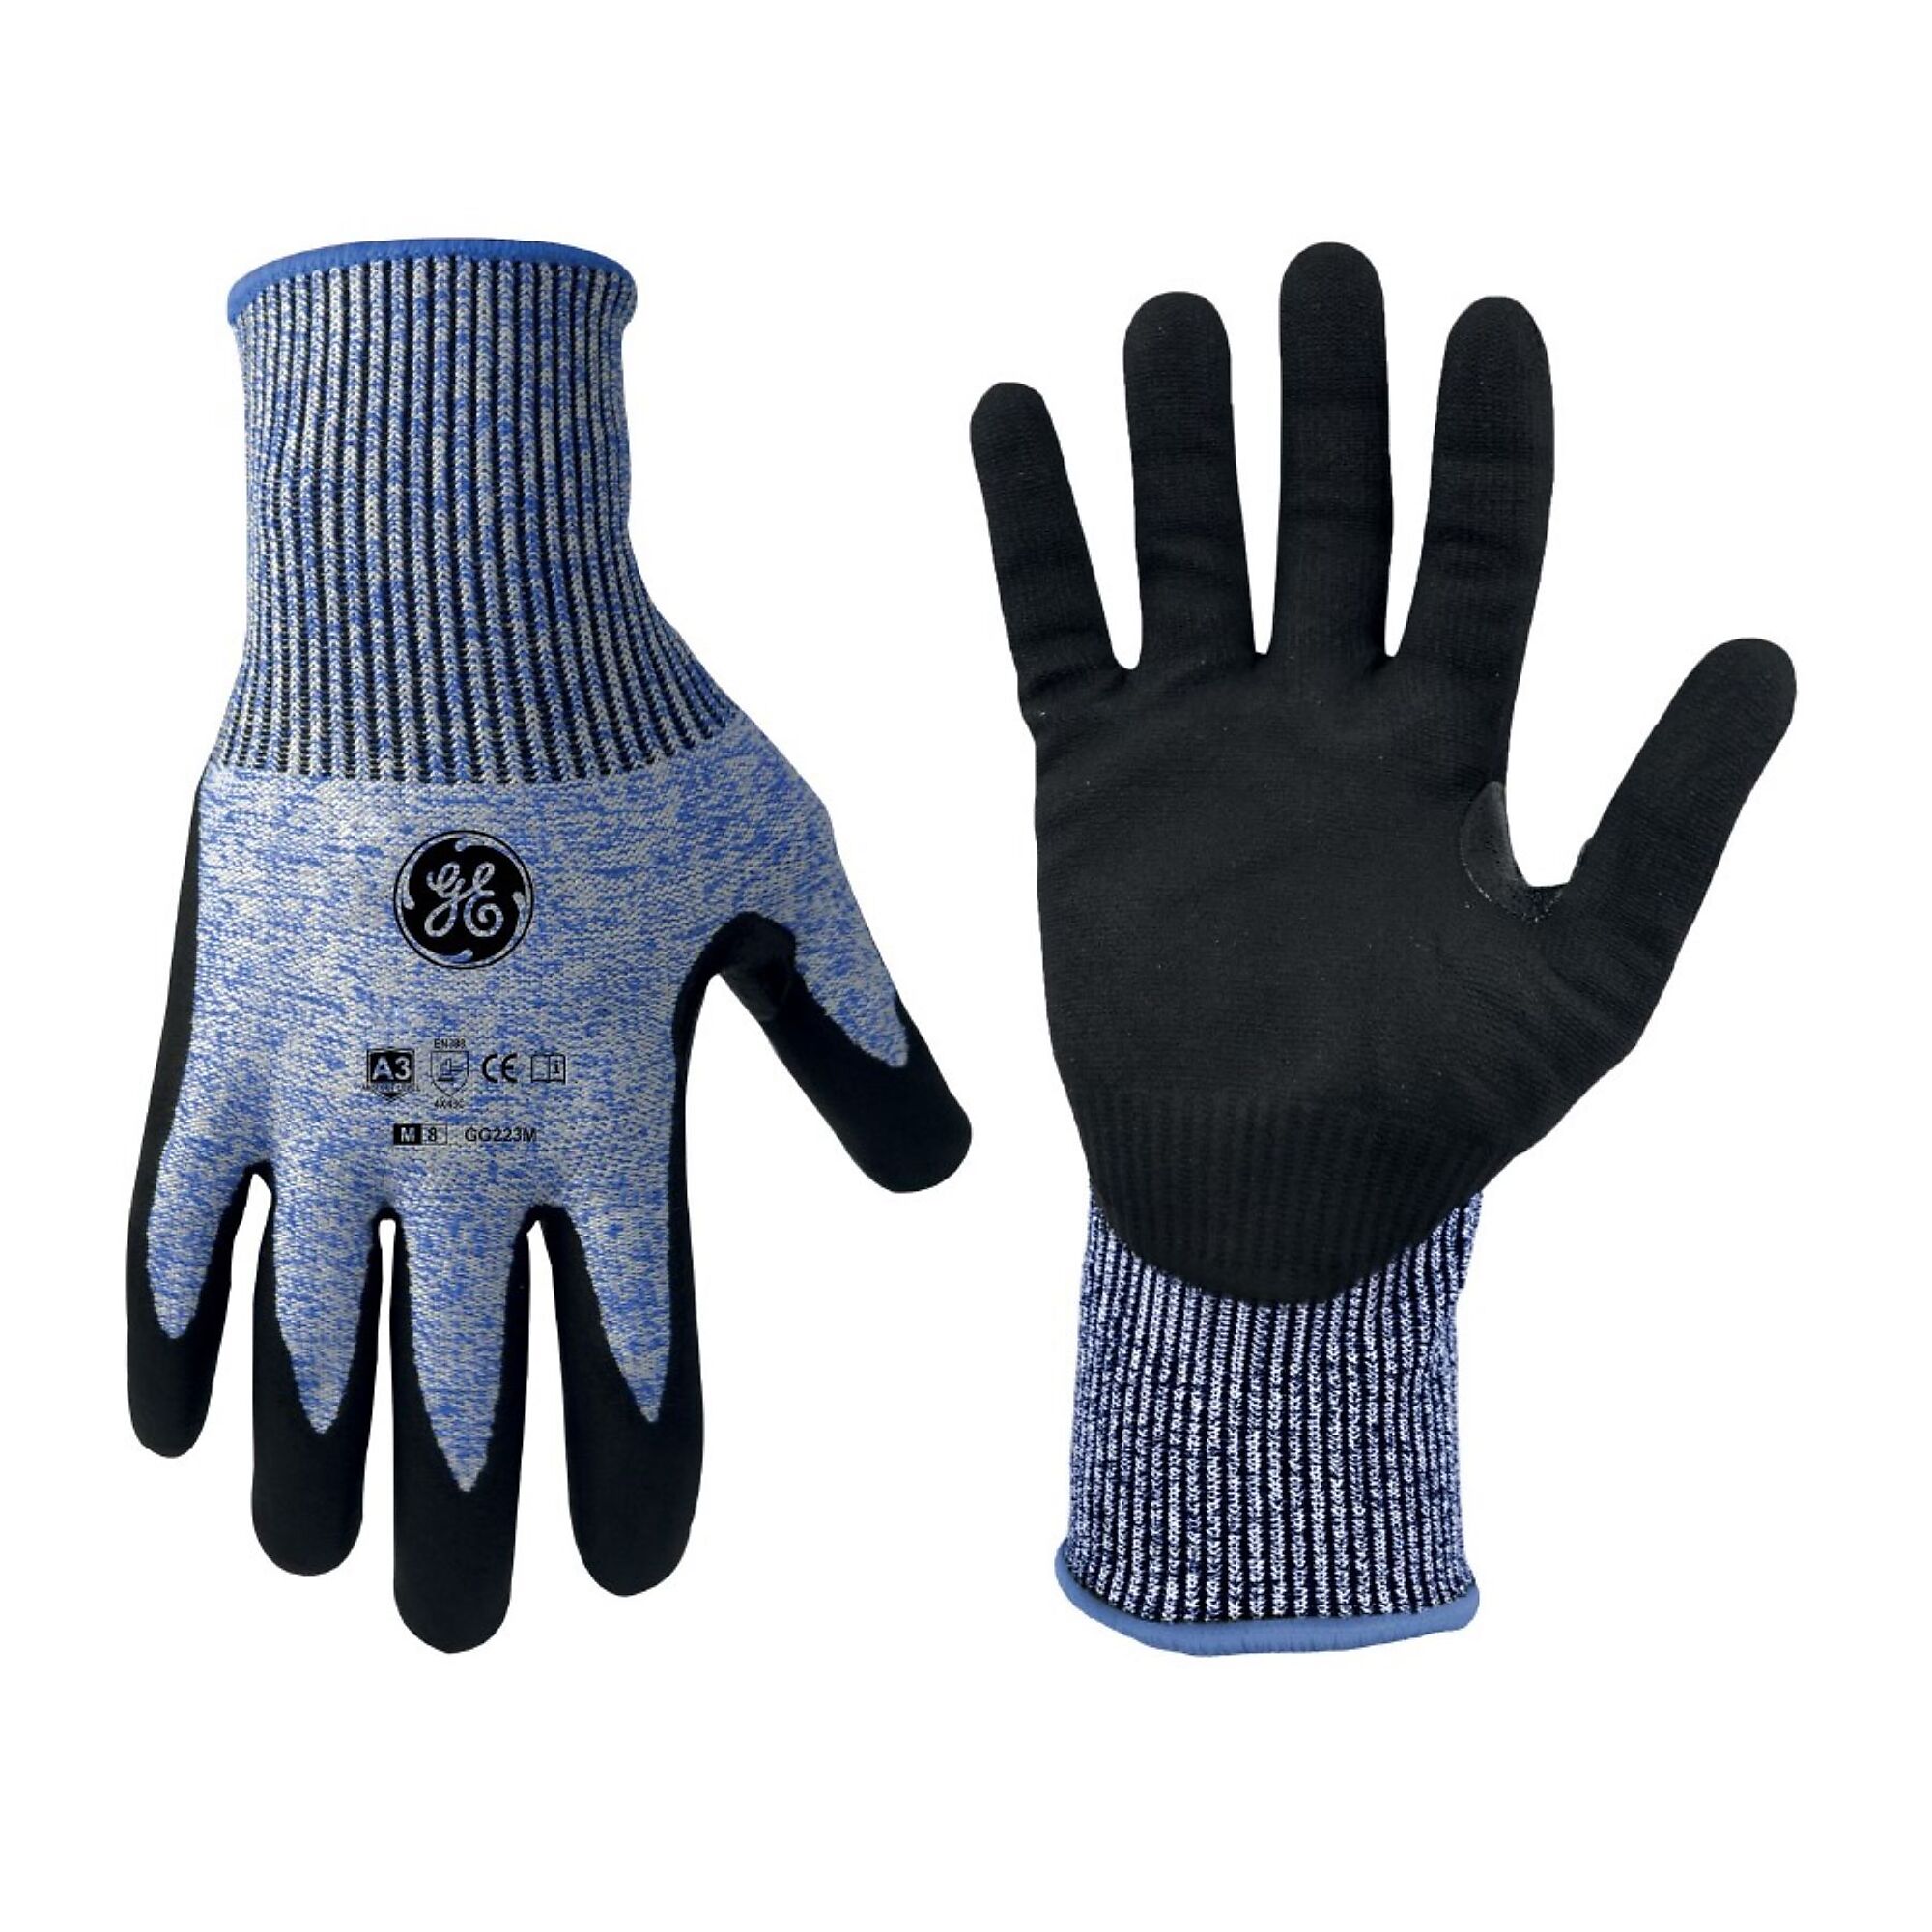 General Electric, Unisex Dipped Gloves Black/Blue M 12 pair, Size M, Included (qty.) 12, Model GG223M